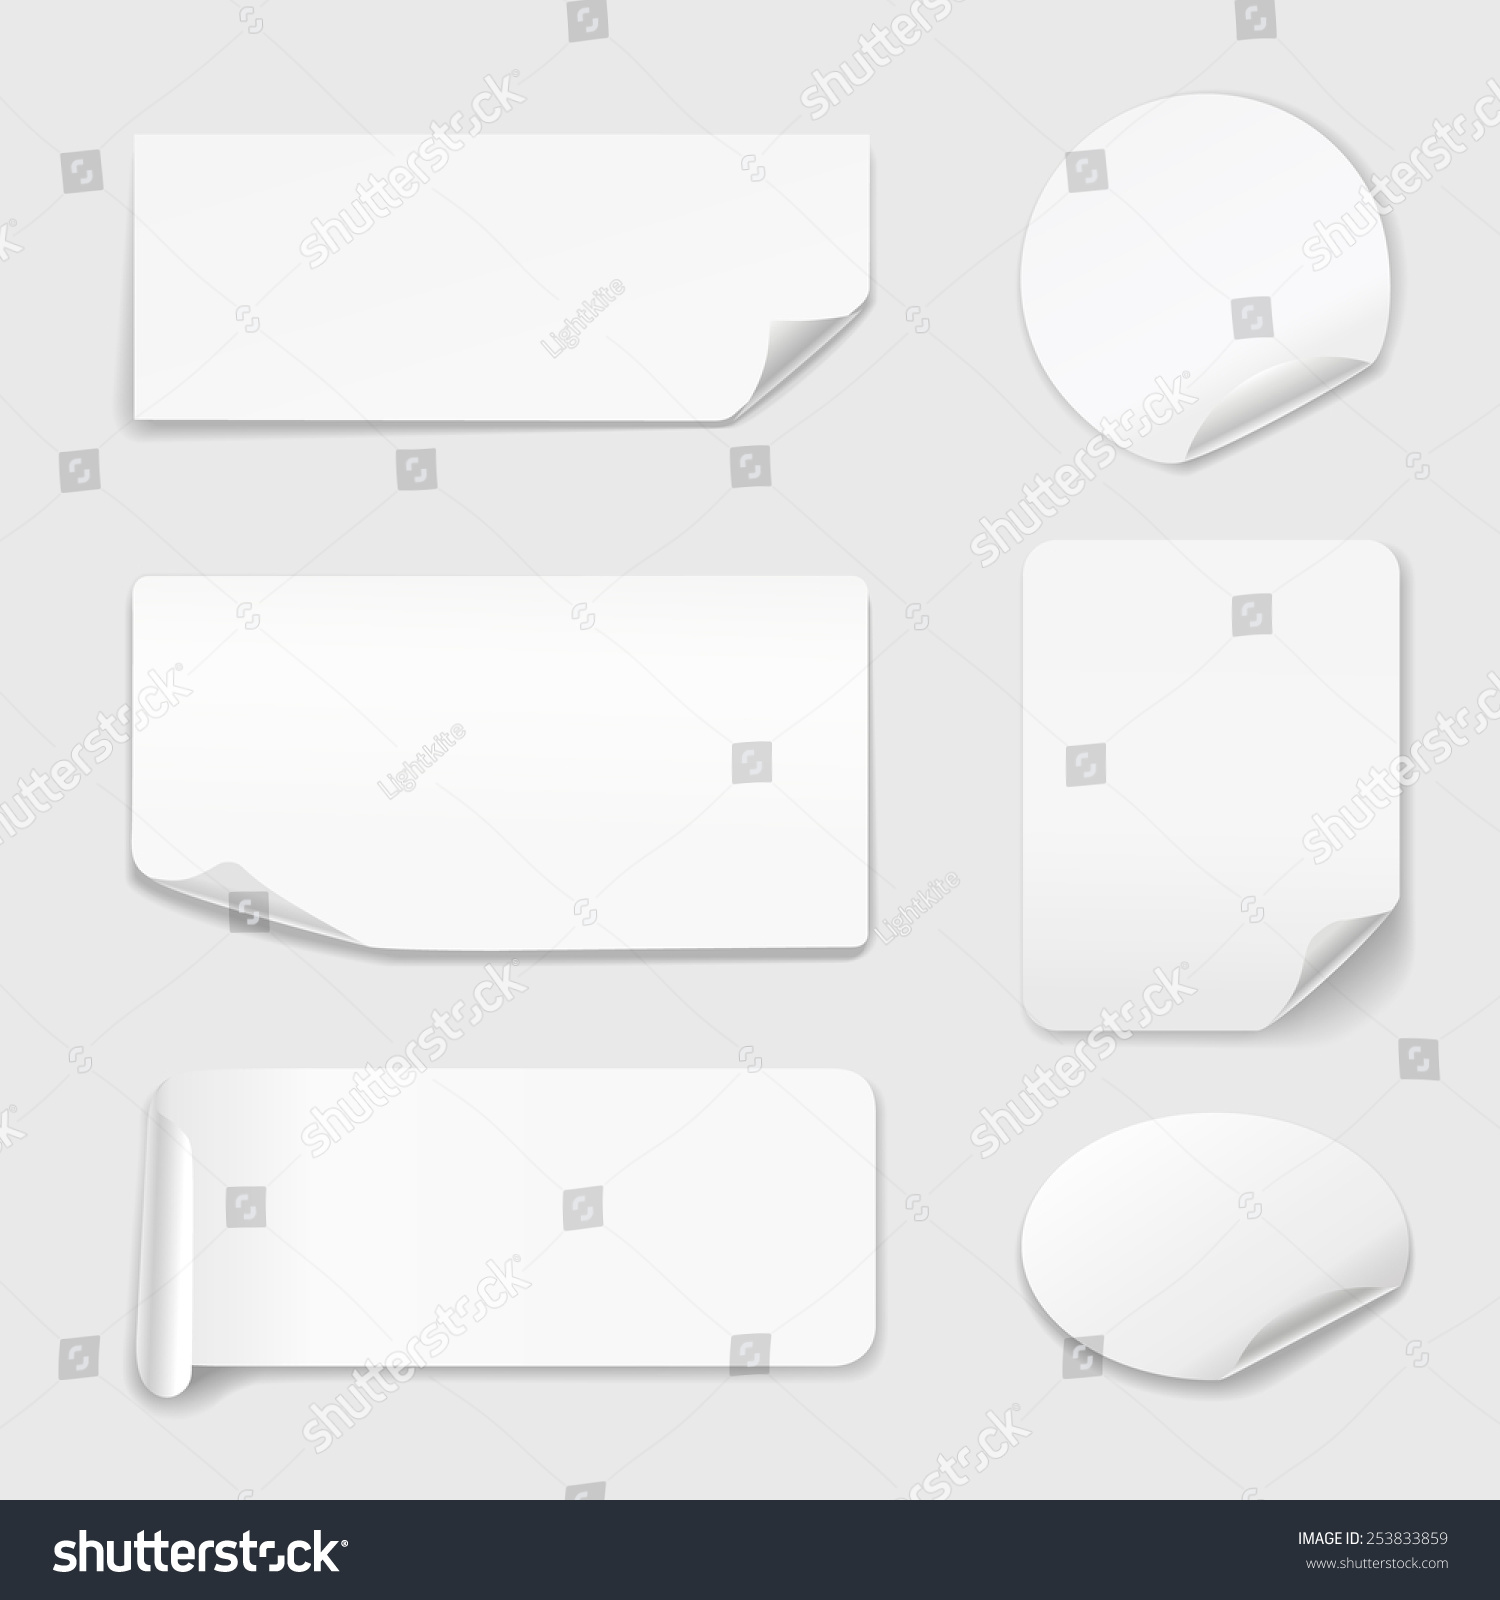 White Stickers - Set of white paper stickers isolated on white background.  Round, rectangular. Vector illustration #253833859